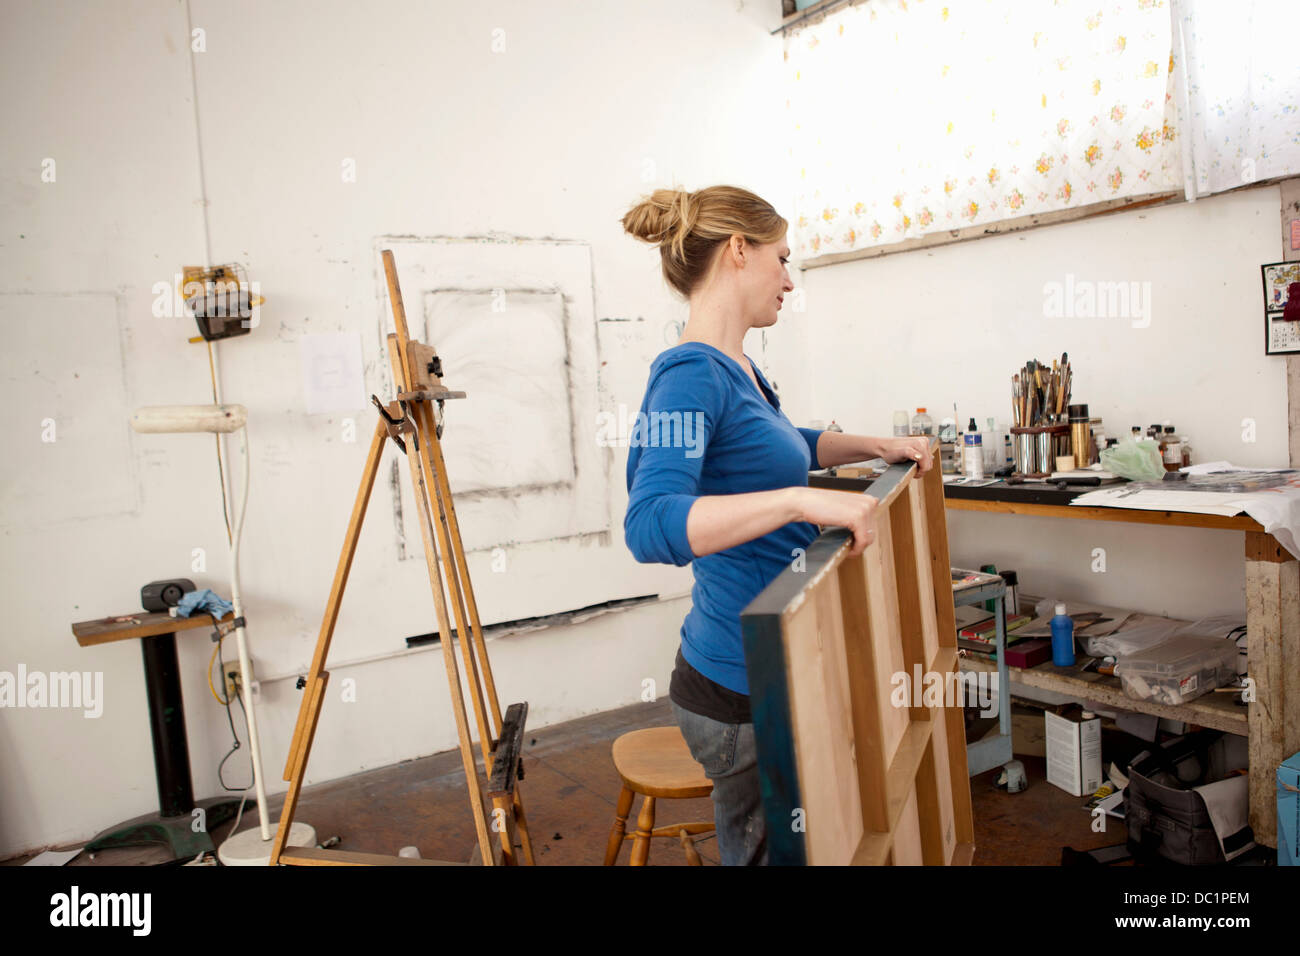 Mid adult woman carrying oil painting in artist's studio Stock Photo